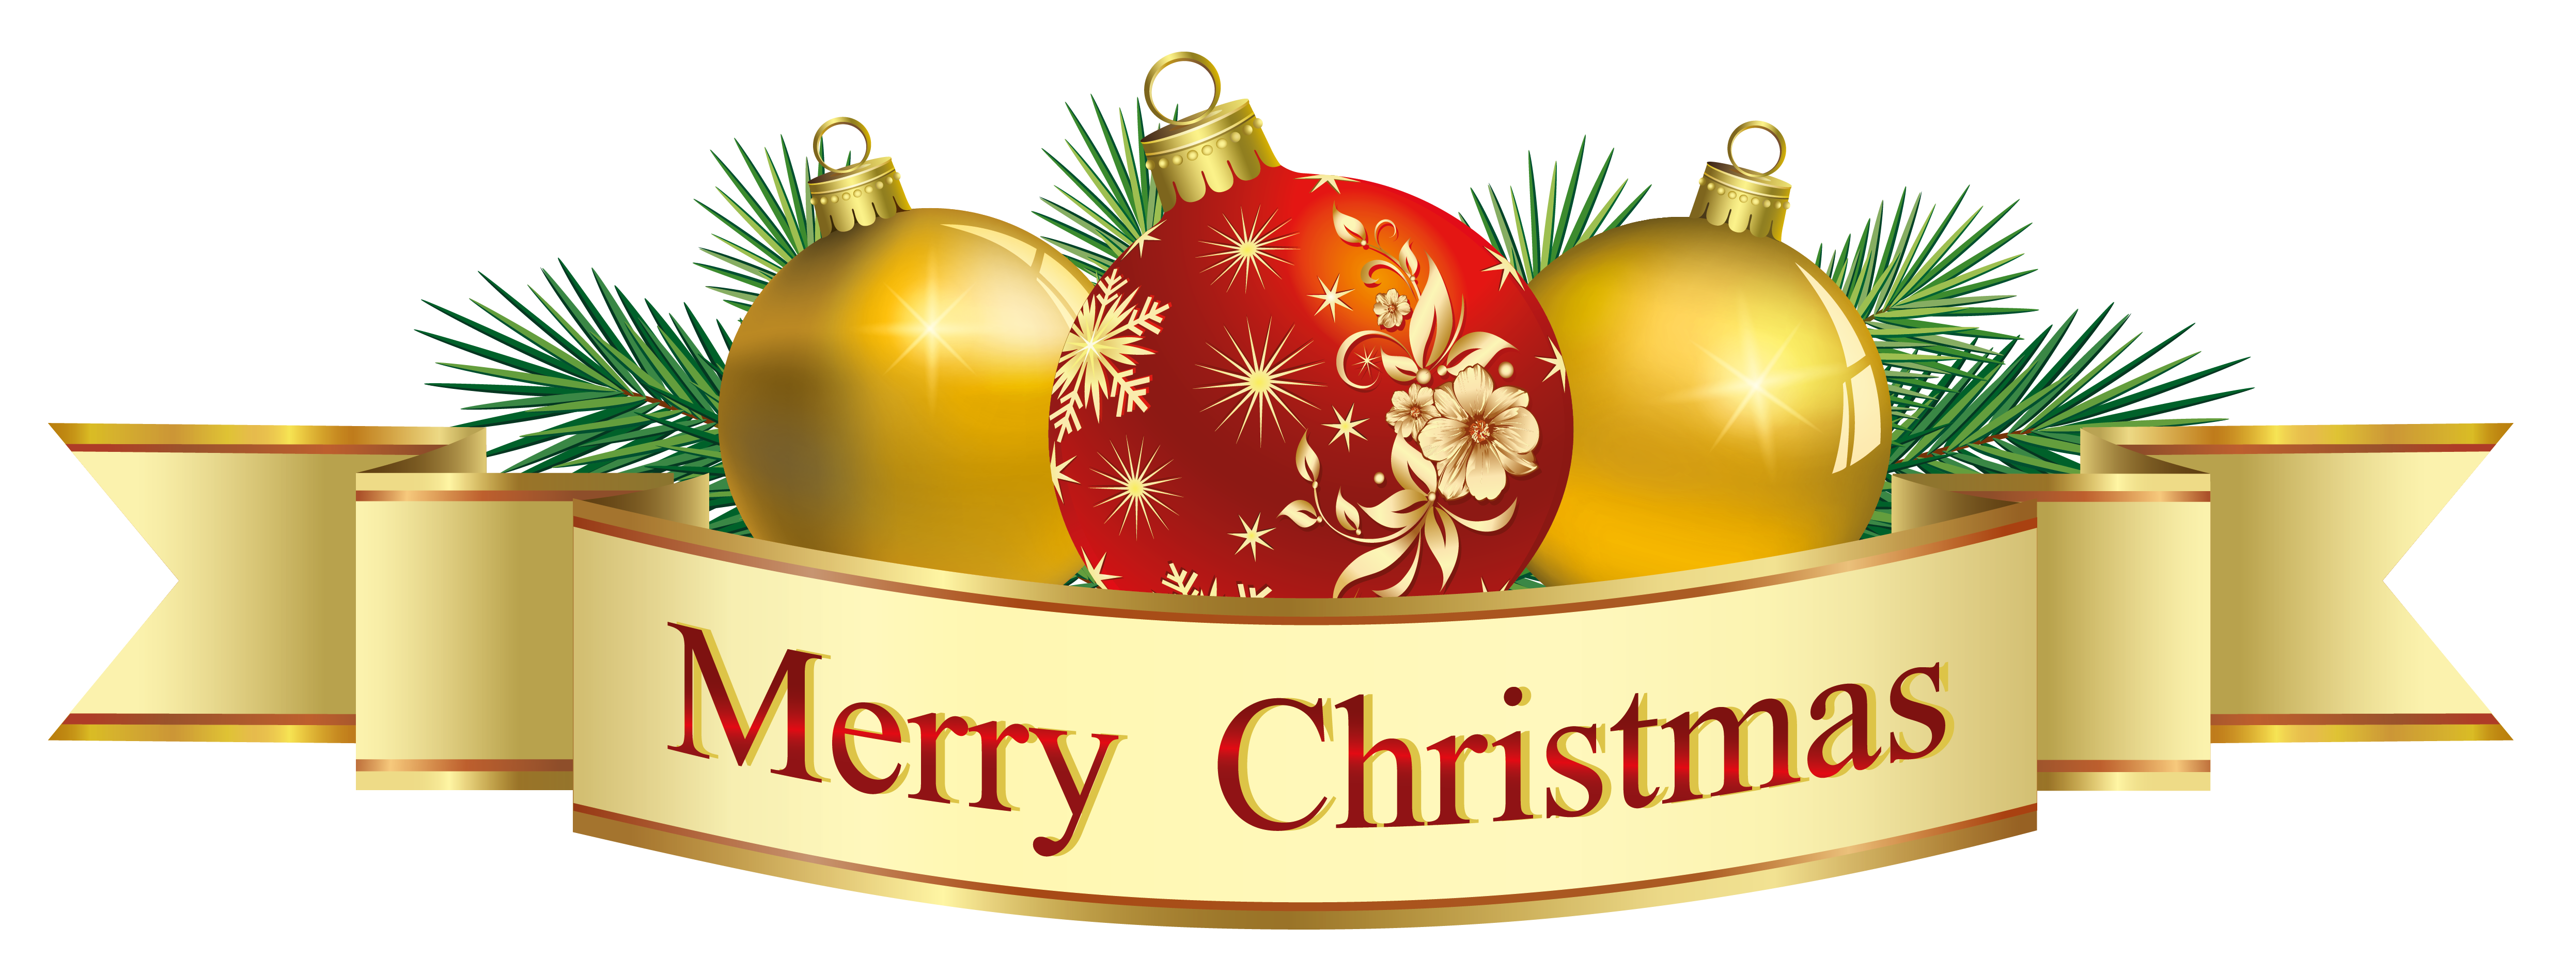 merry christmas clip art png - Clip Art Library